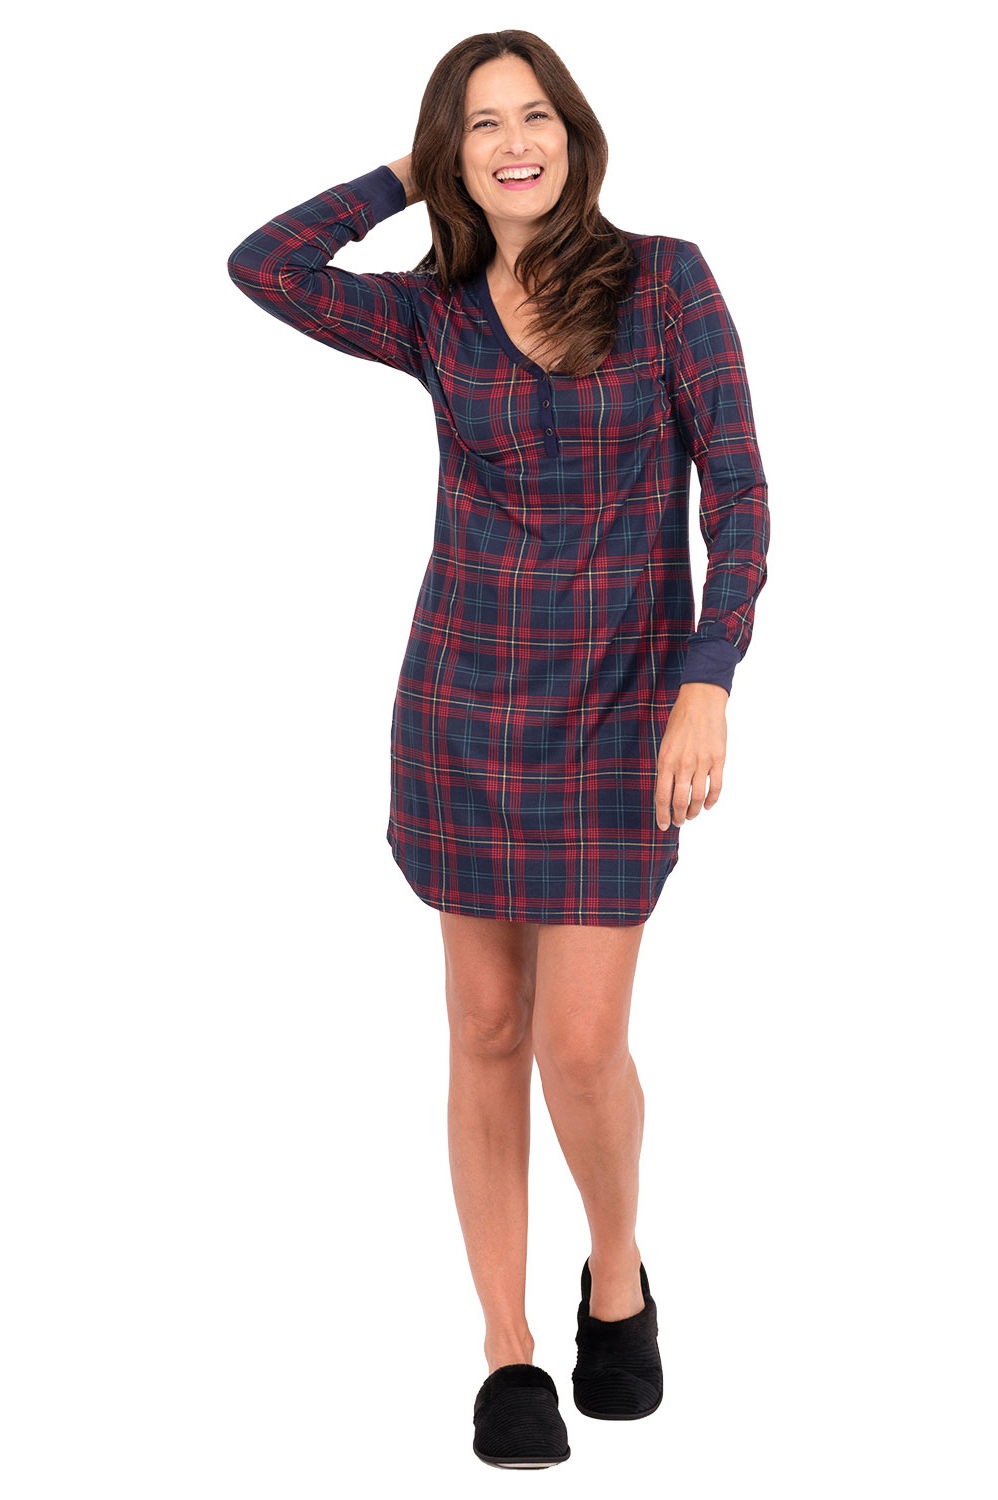 Soft touch, long sleeve v-neck sleepshirt with snap button detail, blue plaid, extra large (XL)